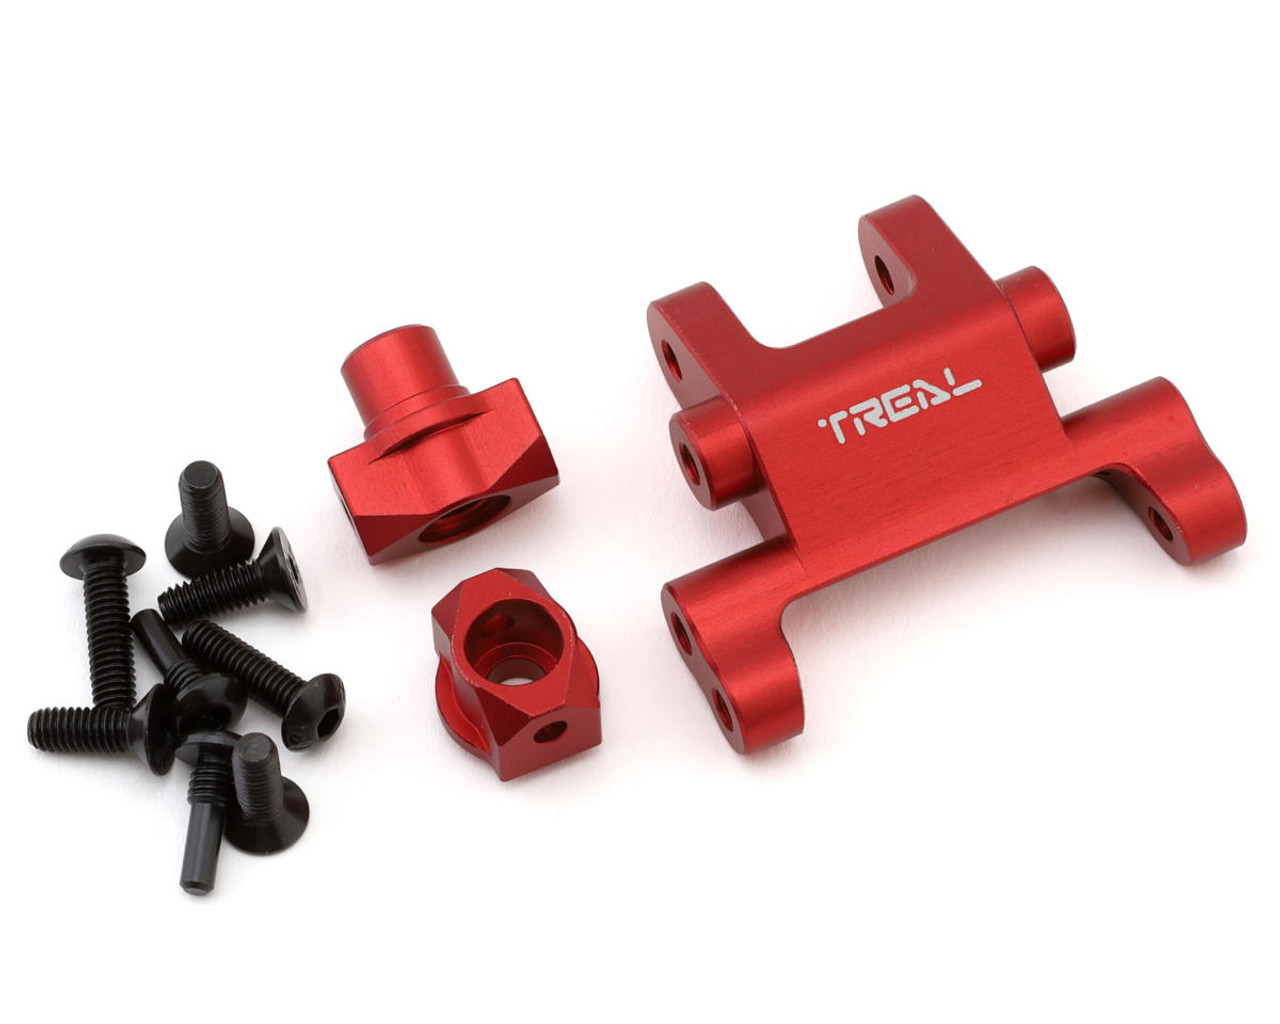 Treal Hobby Losi Promoto MX CNC Aluminum Front Suspension Mount Set (Red)